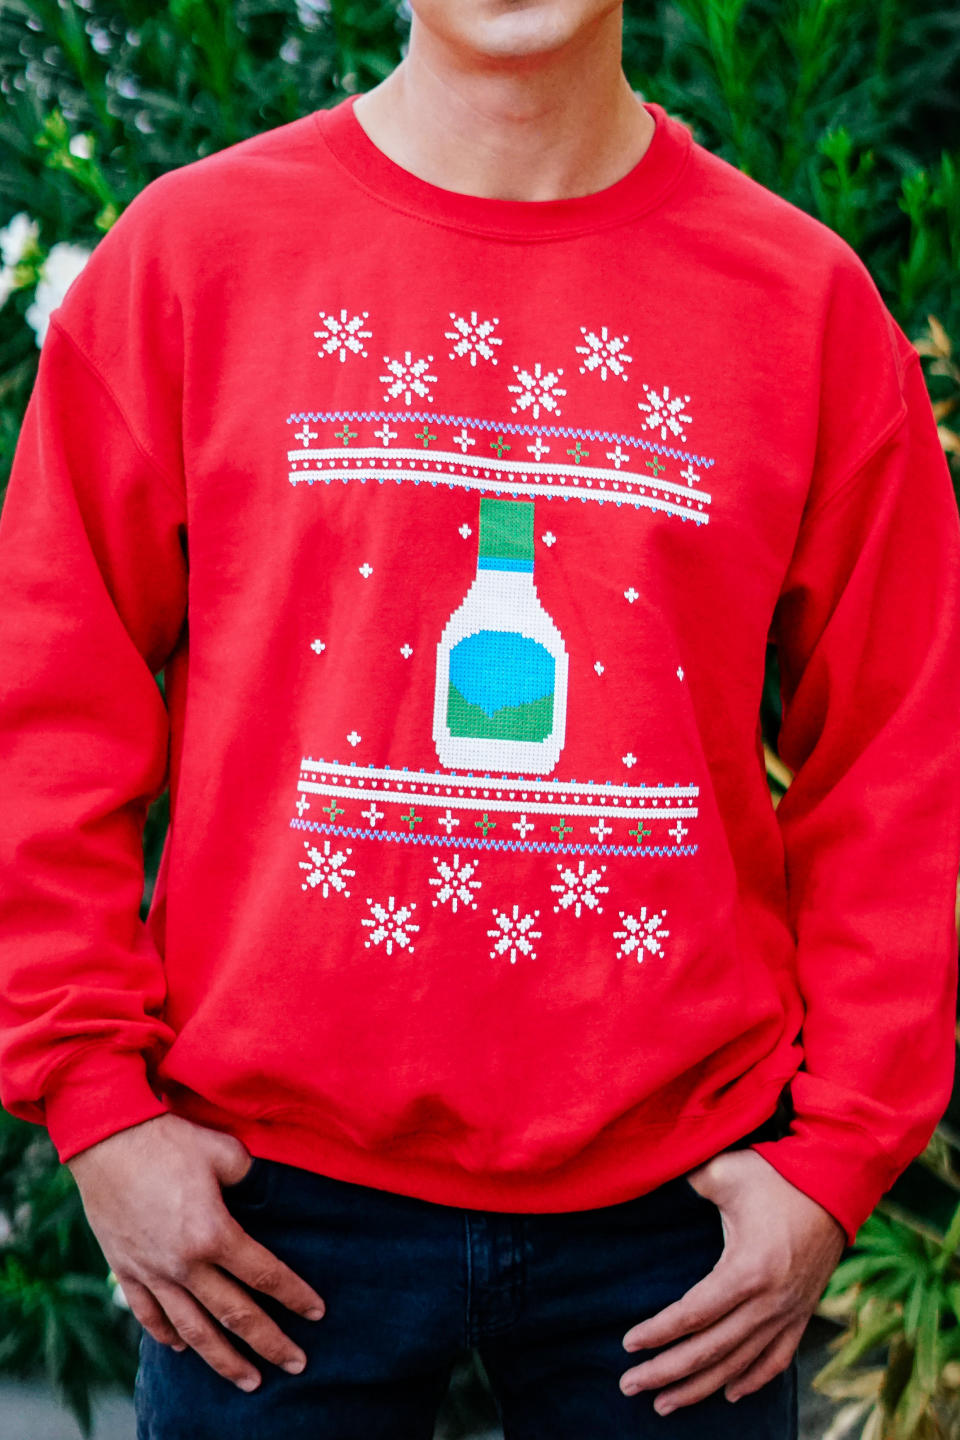 In recent years, companies have started using ugly Christmas sweaters to promote their product (and maybe a little peace and goodwill). I'm a purist: I want my ugly Christmas sweaters to actually be sweaters, not sweatshirts. Yes, sweaters are itchier, but a holiday sweater's itchiness is a feature, not a bug. Also, the patterns should cover the entire sweater, not just the middle. Amazingly, the actual <a href="https://www.flavourgallery.com/collections/hidden-valley-ranch/products/hidden-valley-holiday-sweater-unisex" target="_blank">Hidden Valley logo</a> on this sweatshirt seems to be hidden.